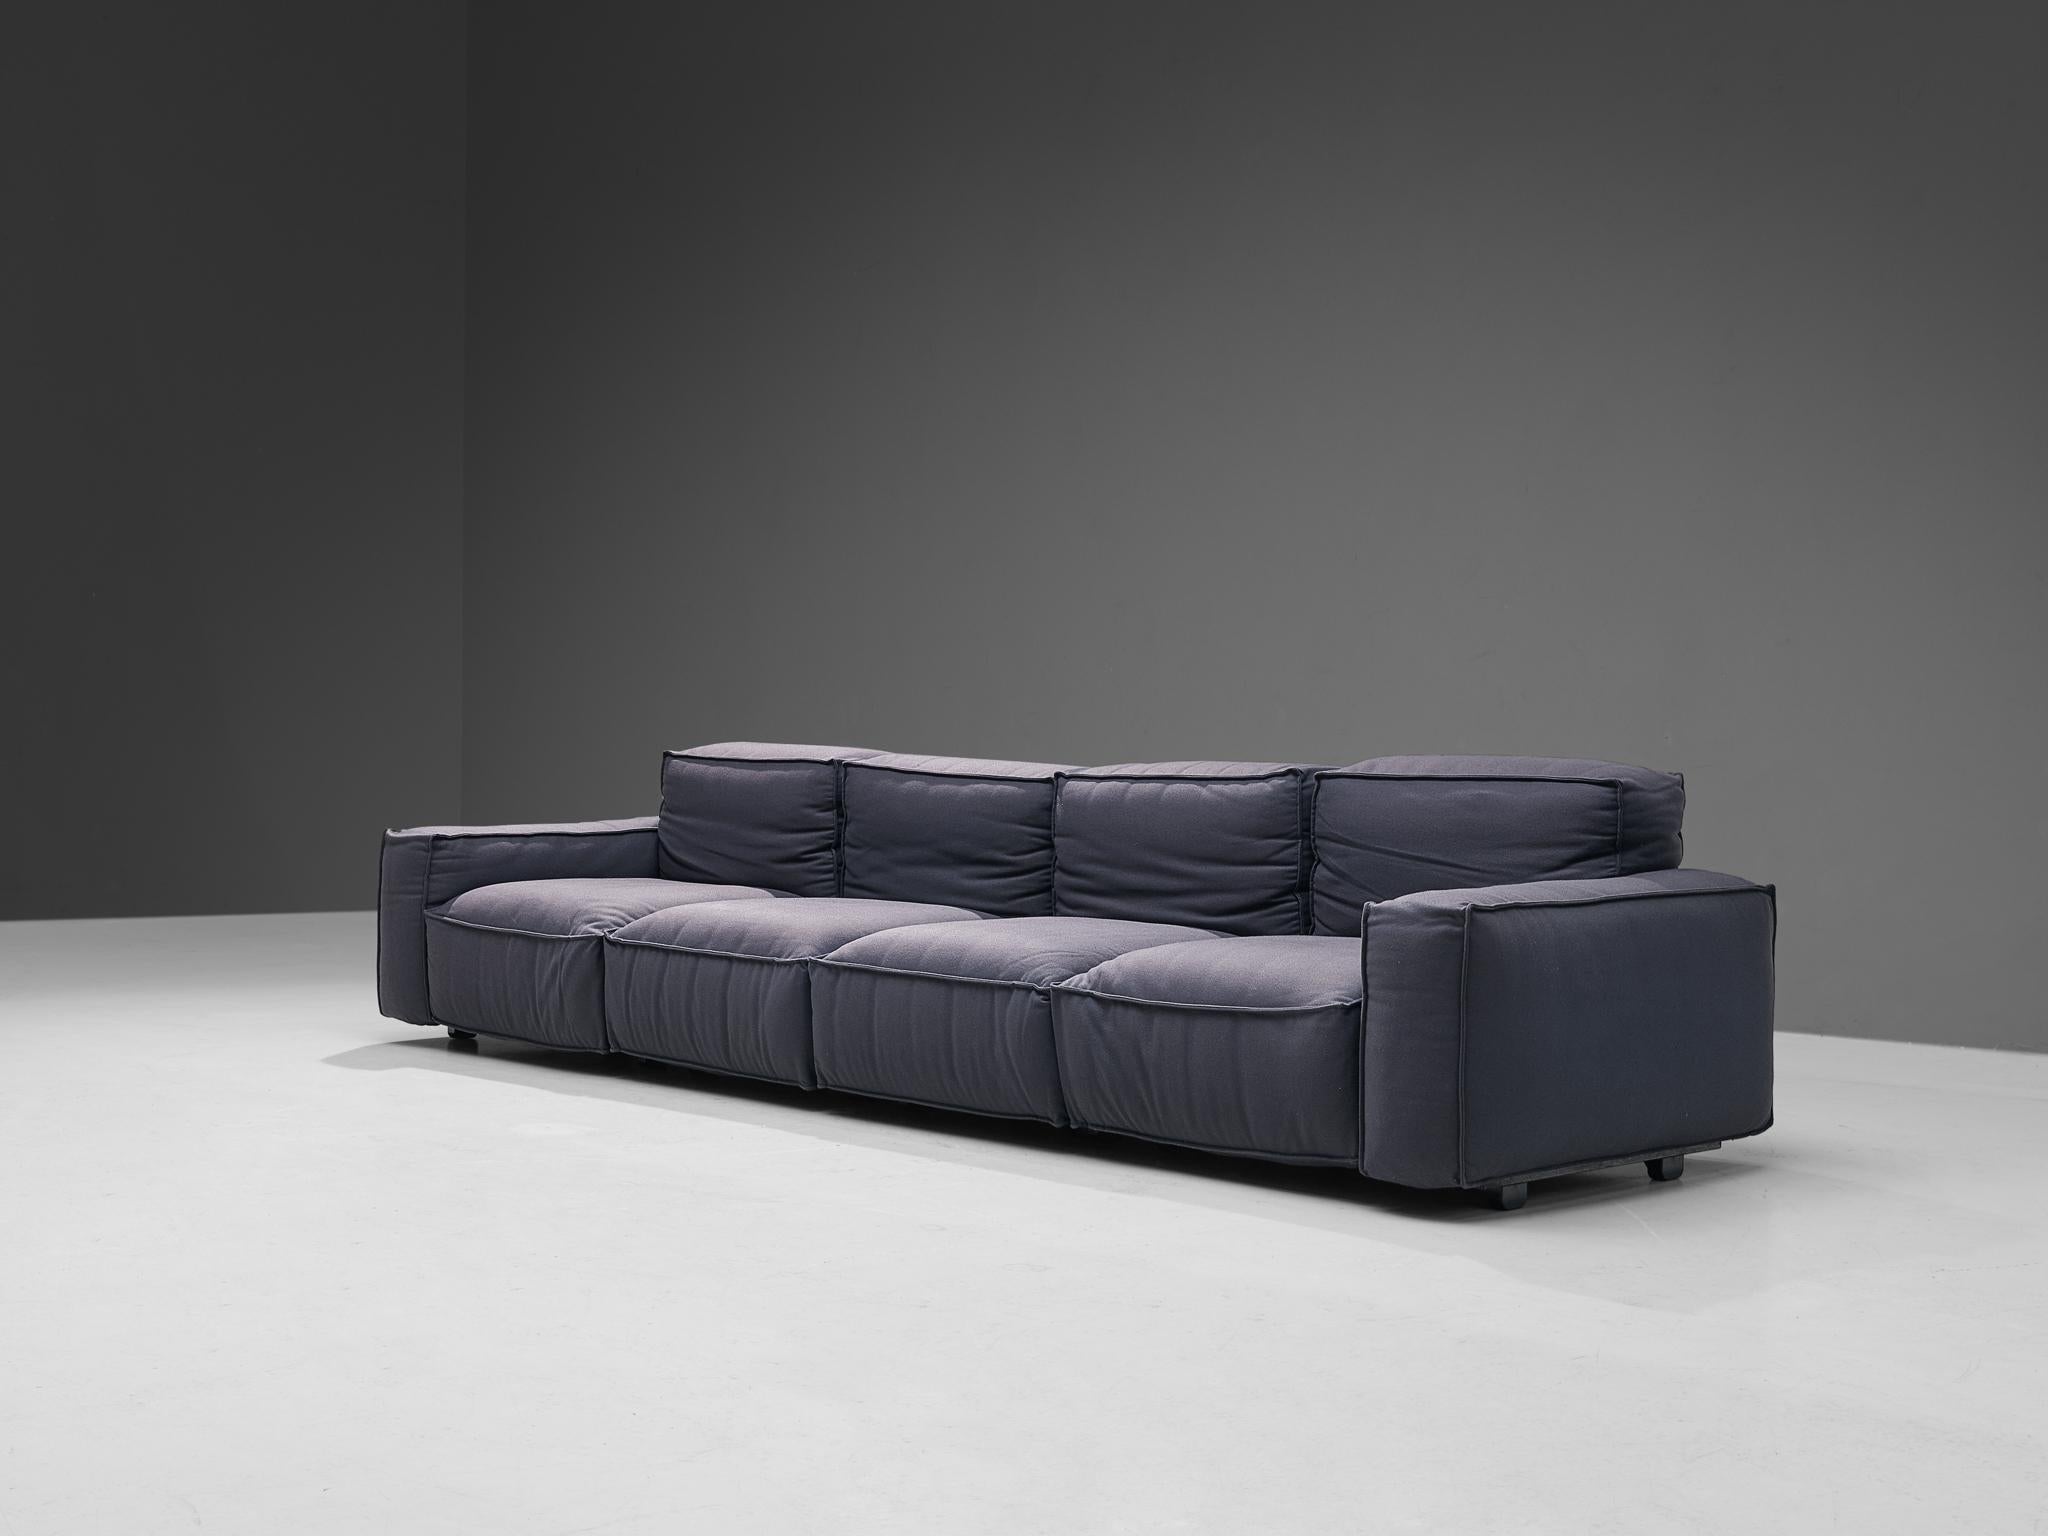 Mario Marenco for Arflex, modular four-seater sofa model 'Marechiaro', wool, plastic, metal, Italy, circa 1976.

This well-designed sofa by Mario Marenco for Arflex is fully executed in deep blue wool upholstery that contributes to the whole unit’s